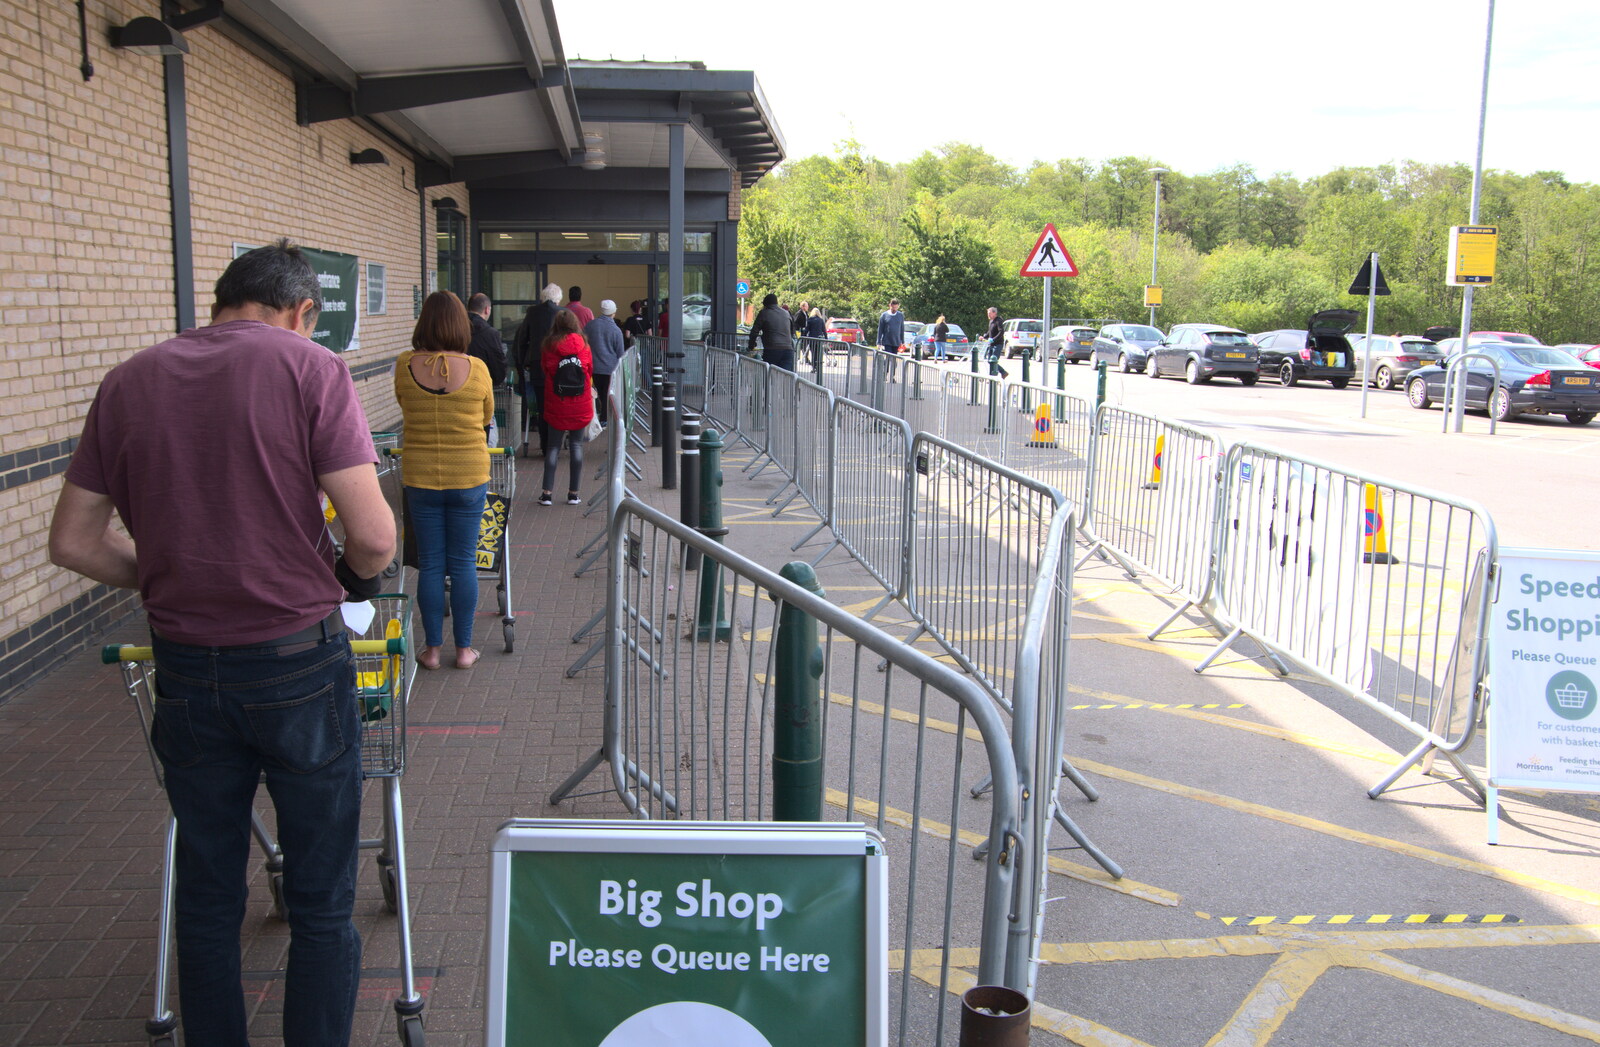 The socially-distanced queues for a 'big shop' from More Lockdown Fun, Diss and Eye, Norfolk and Suffolk - 30th May 2020